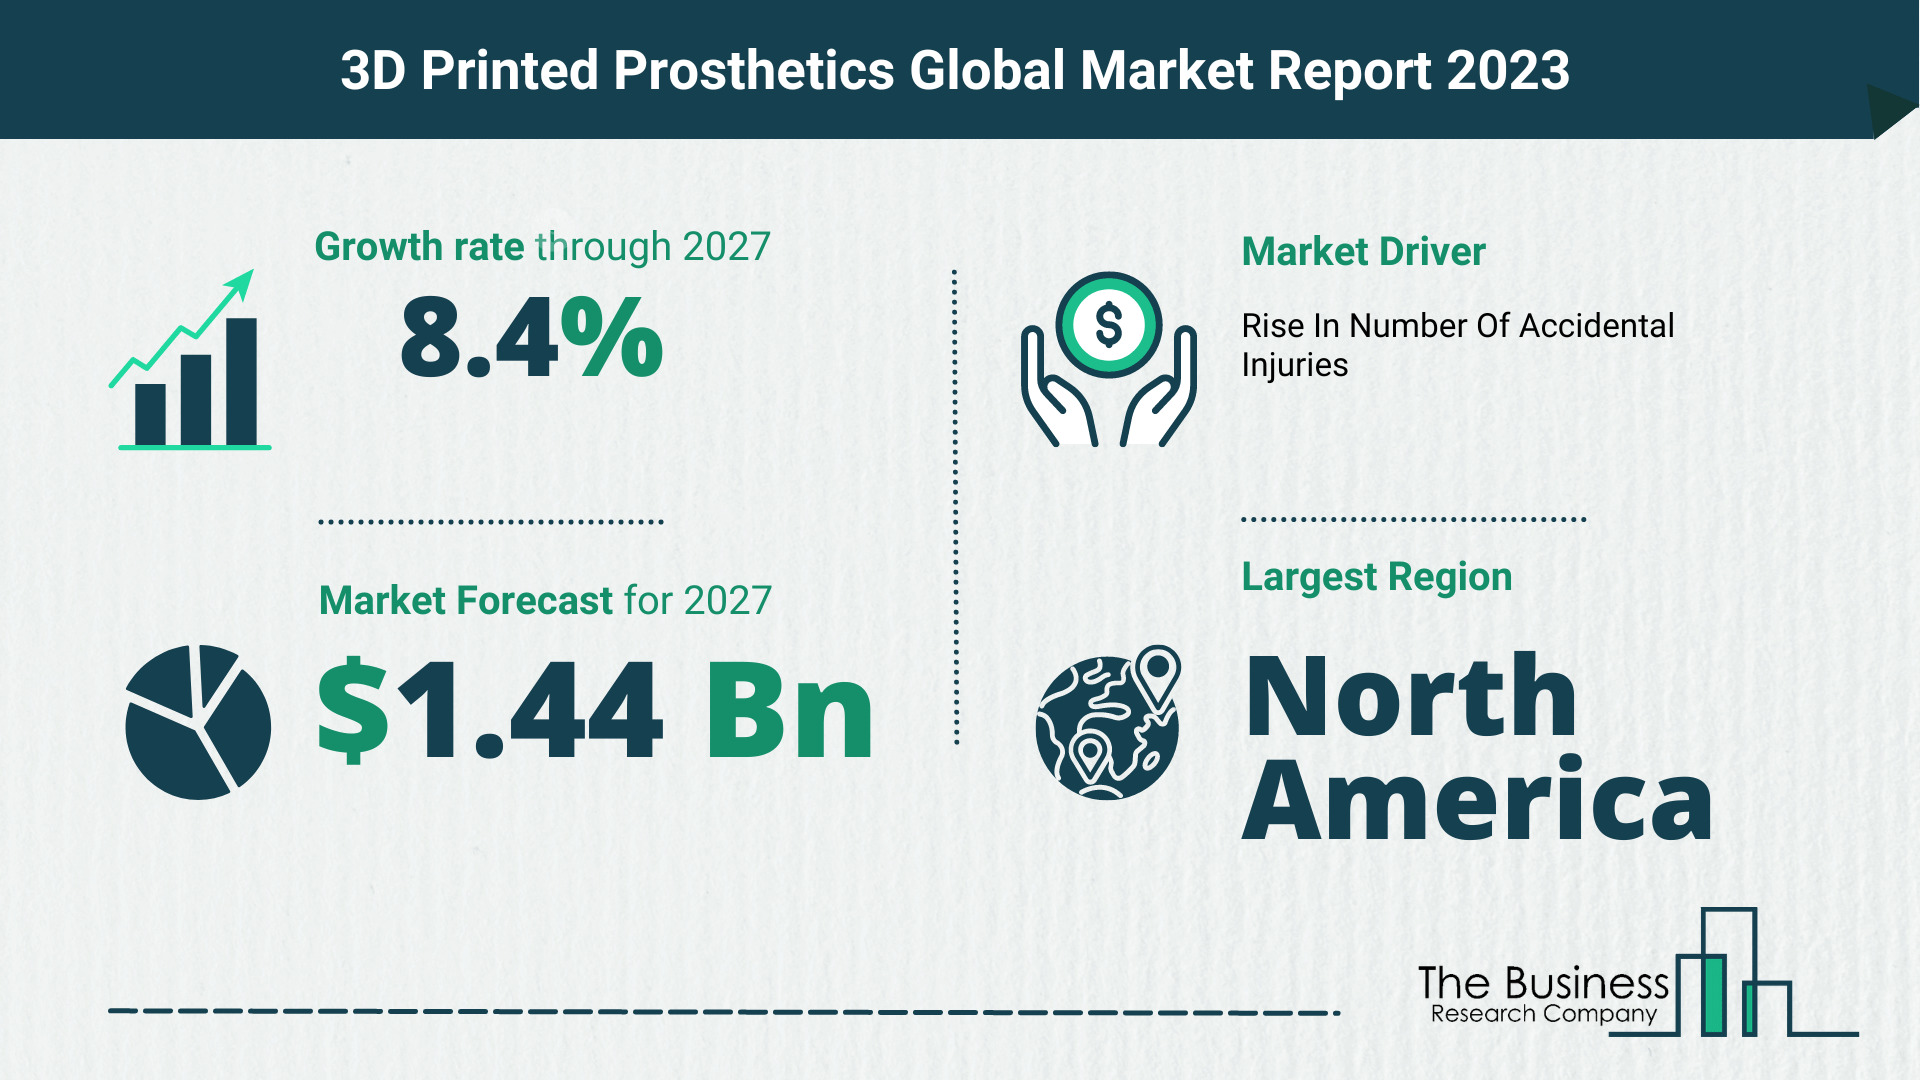 How Will The 3D Printed Prosthetics Market Globally Expand In 2023?